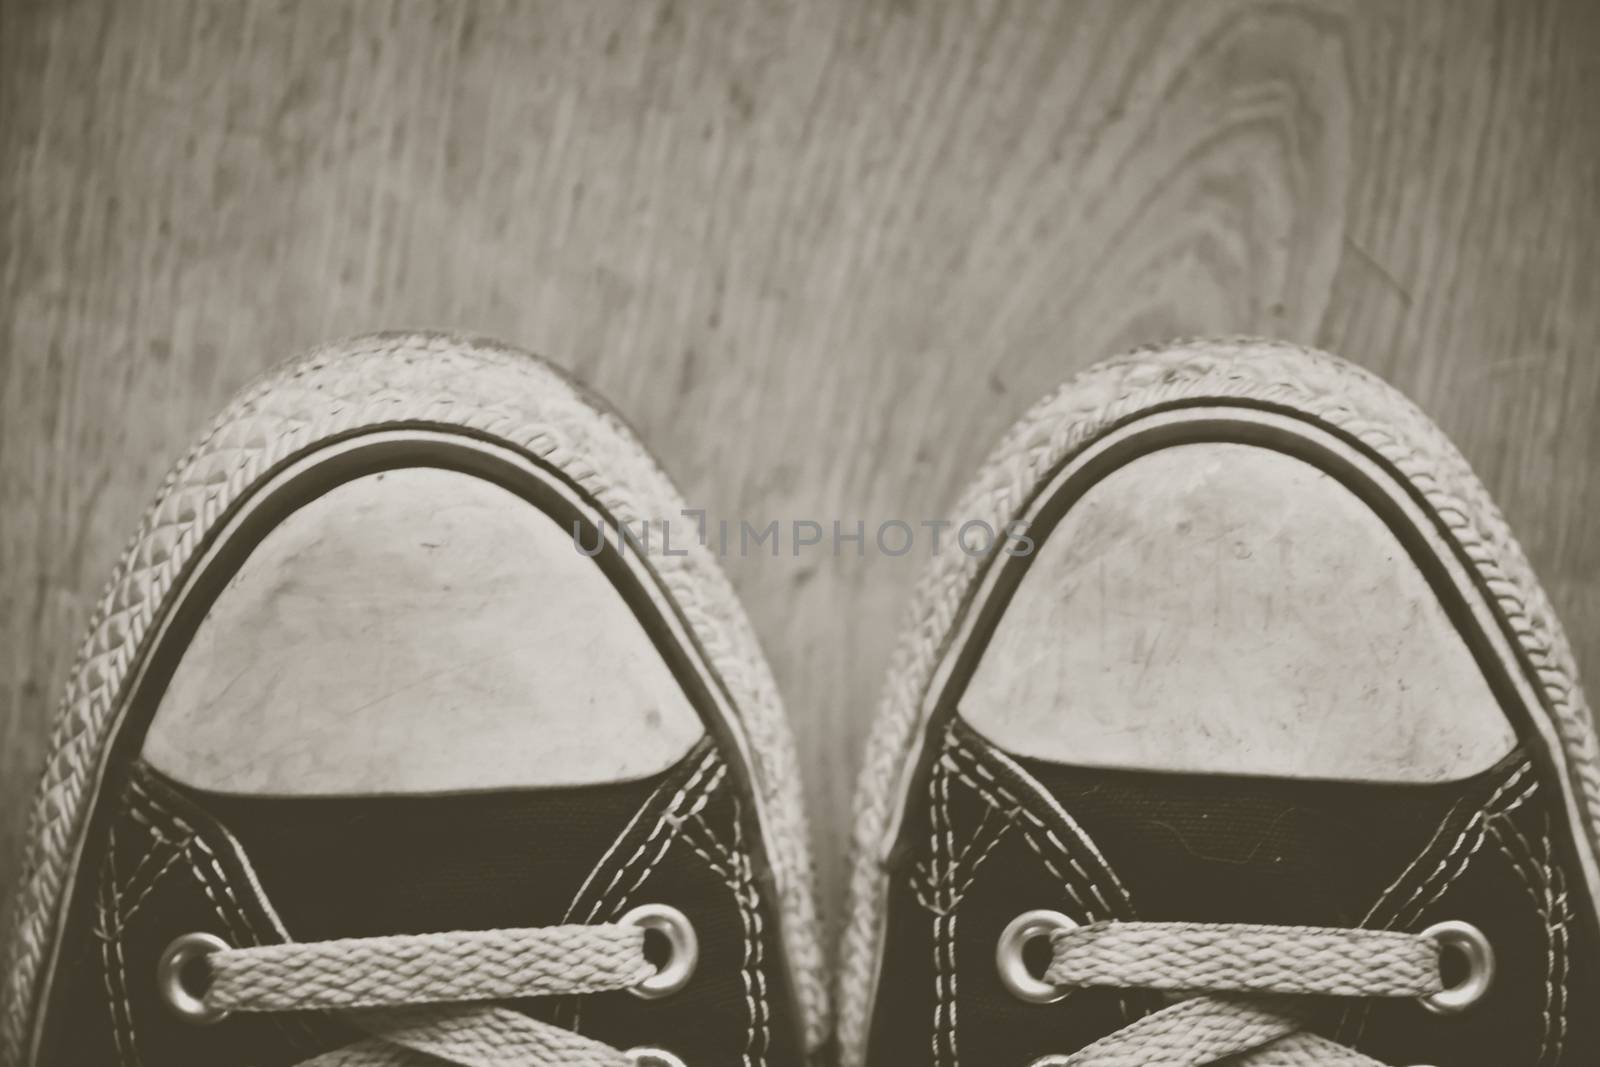 orn out converse Chuck Taylor All-Star sneakers tips, with black fabric, on wooden floor. Creative edit. by kb79